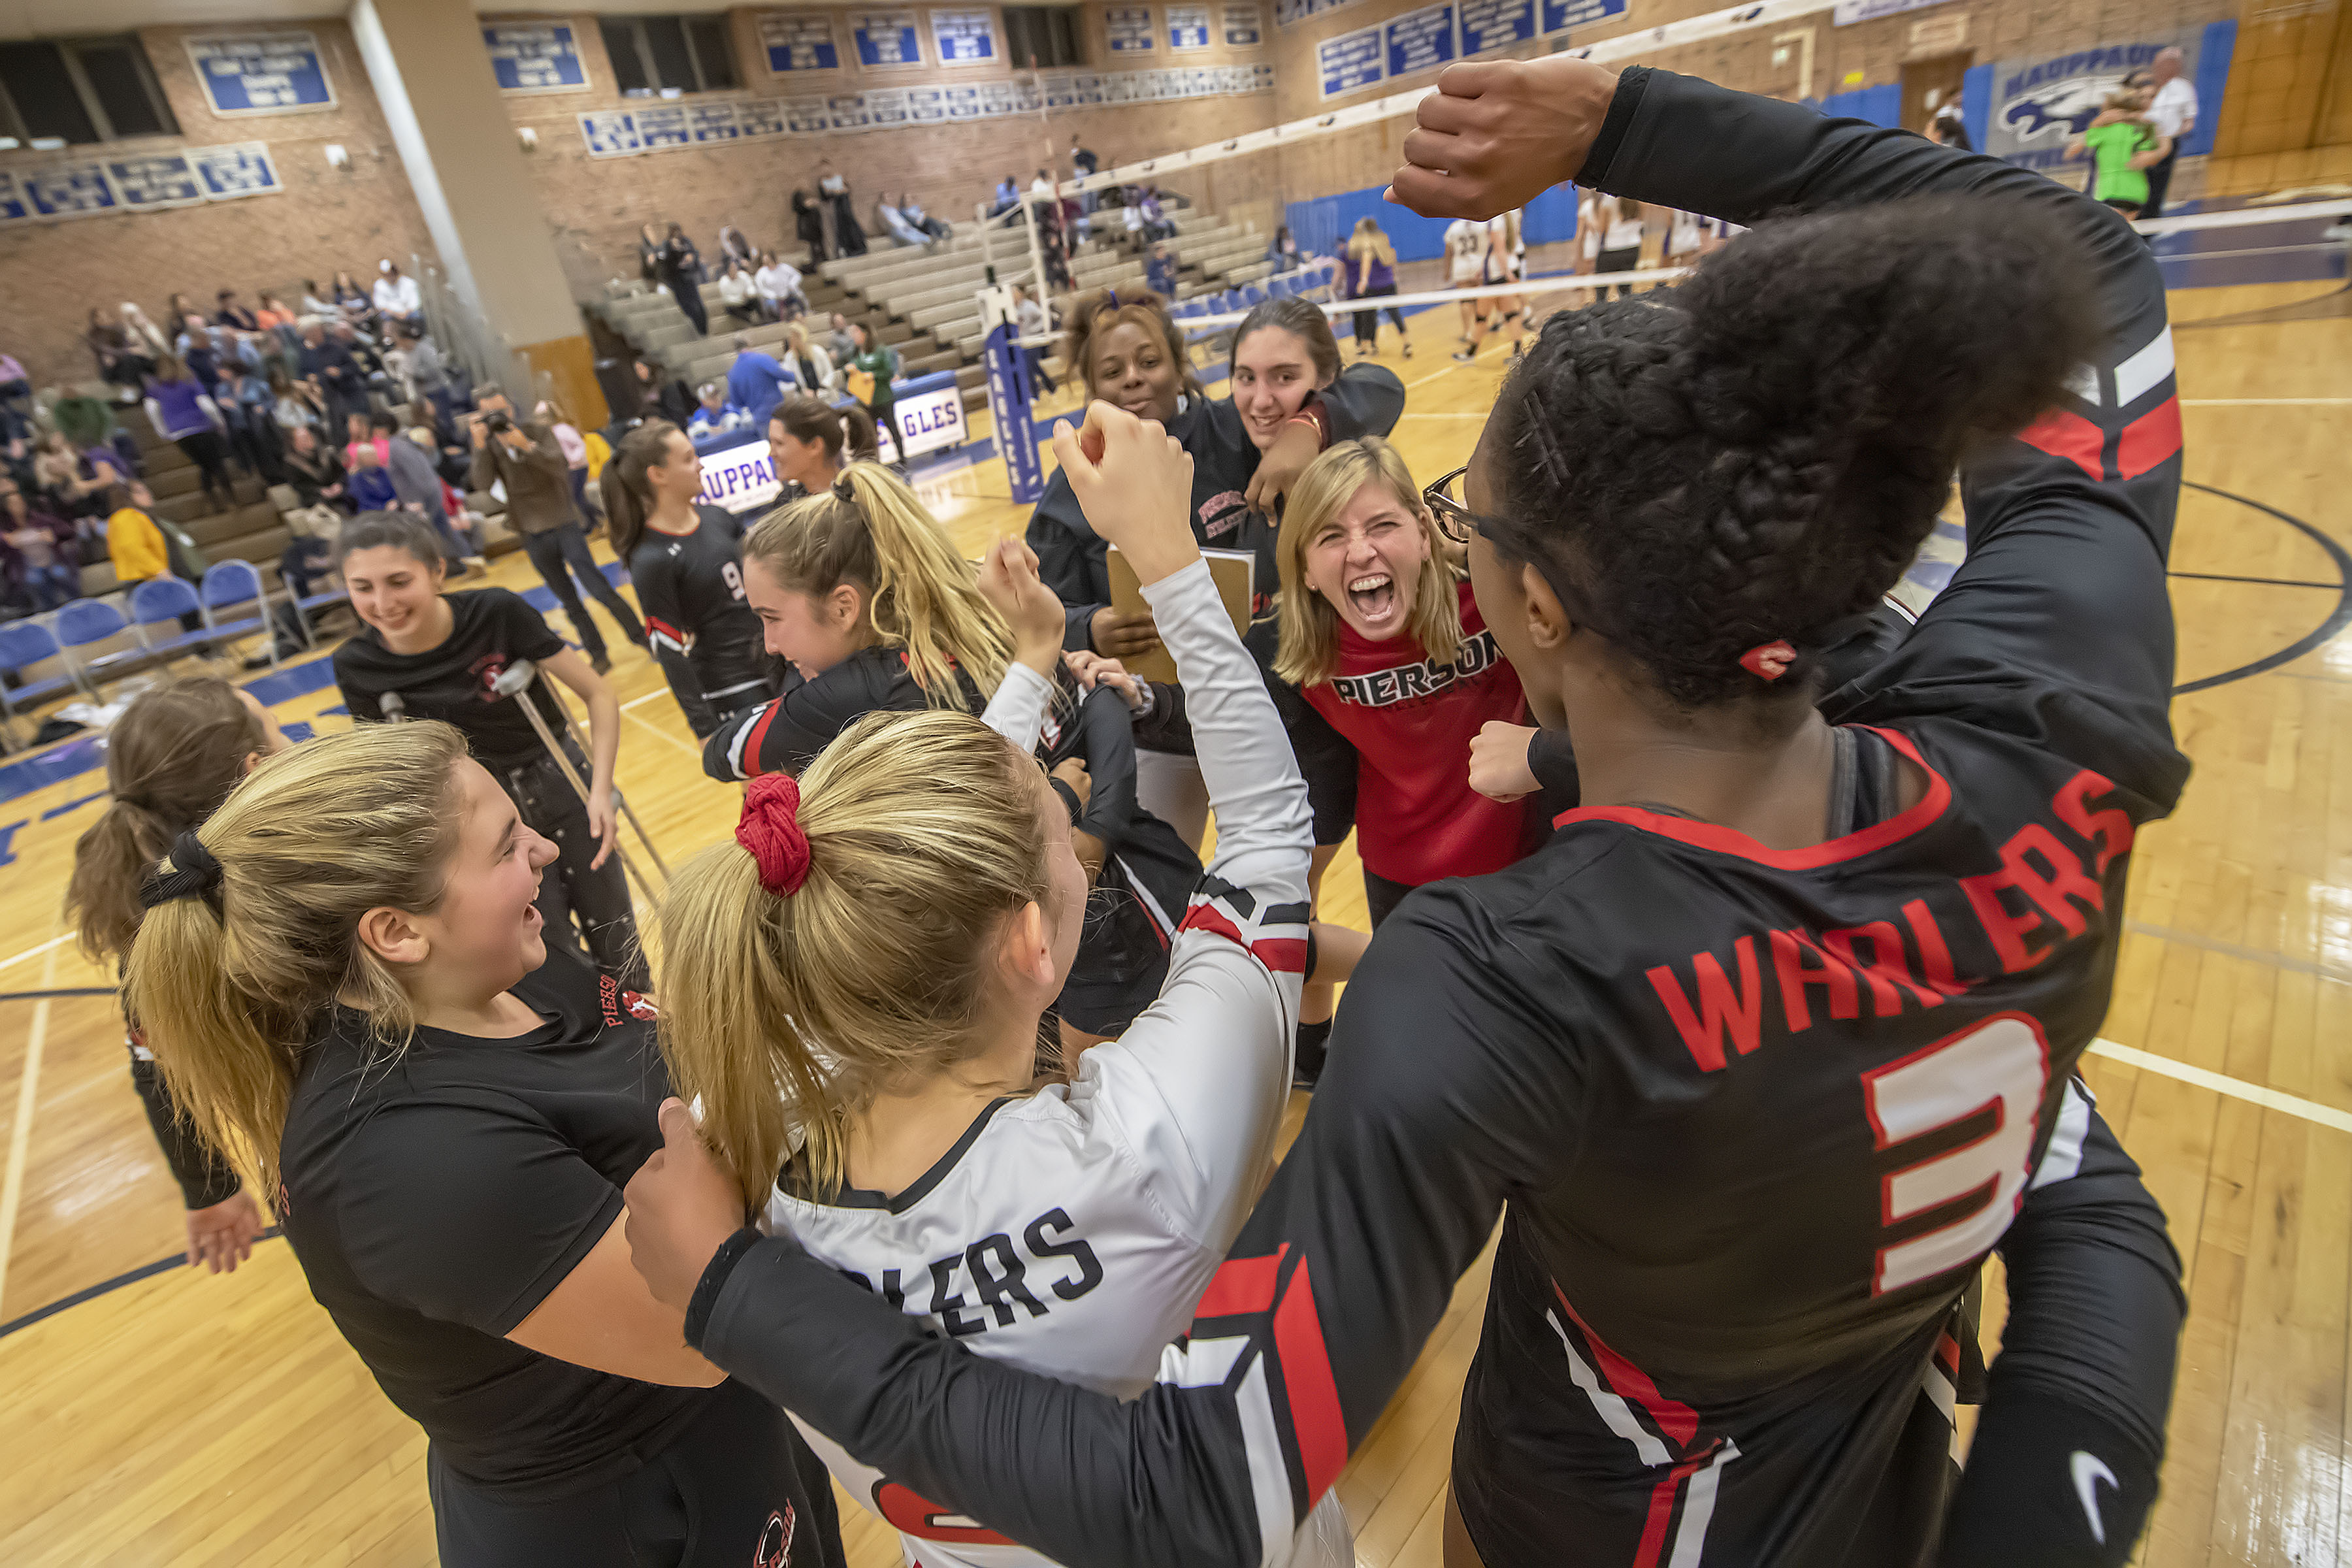 Pierson coach Donna Fisher, at center, celebrates with her team after the Lady Whalers defeated the Oyster Bay Lady Baymen to win the Long Island Class C Volleyball Championship at Hauppauge High School on Saturday night.